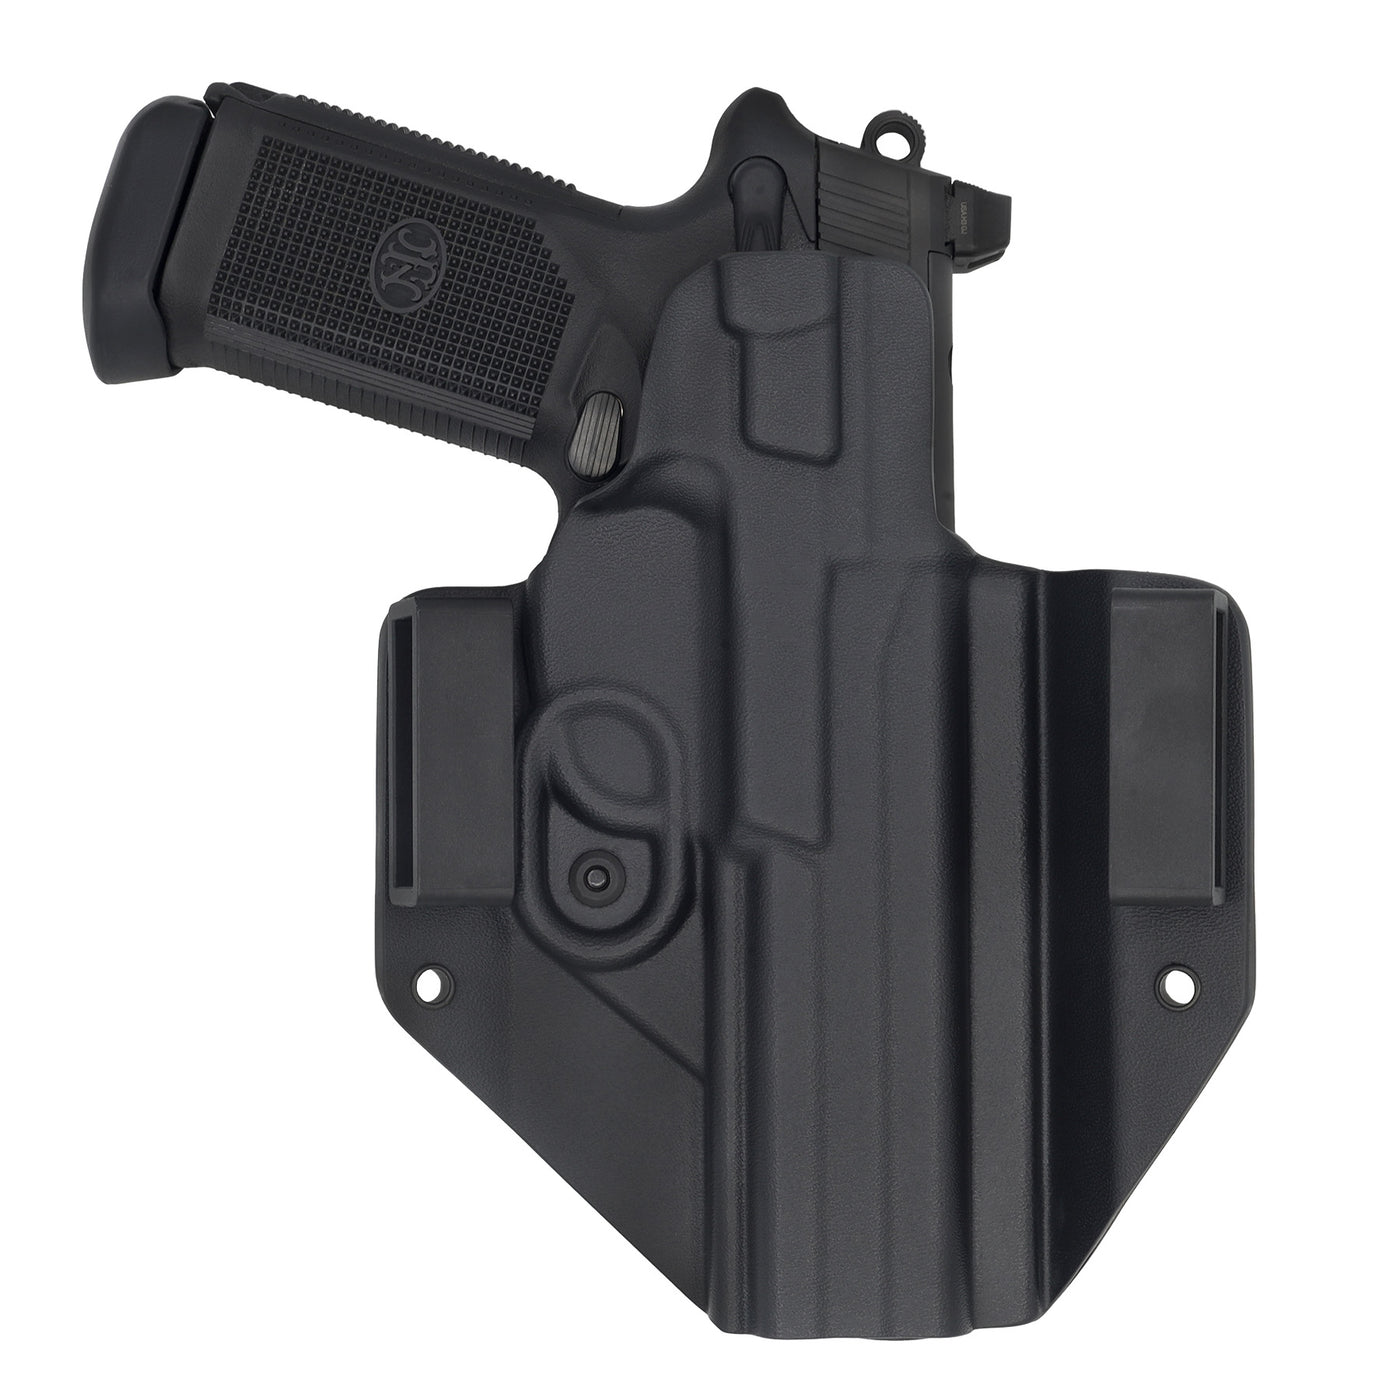 This is the rear of the C&G Holsters Left hand outside the waistband Covert series holster for the FNH FNX45T with the gun